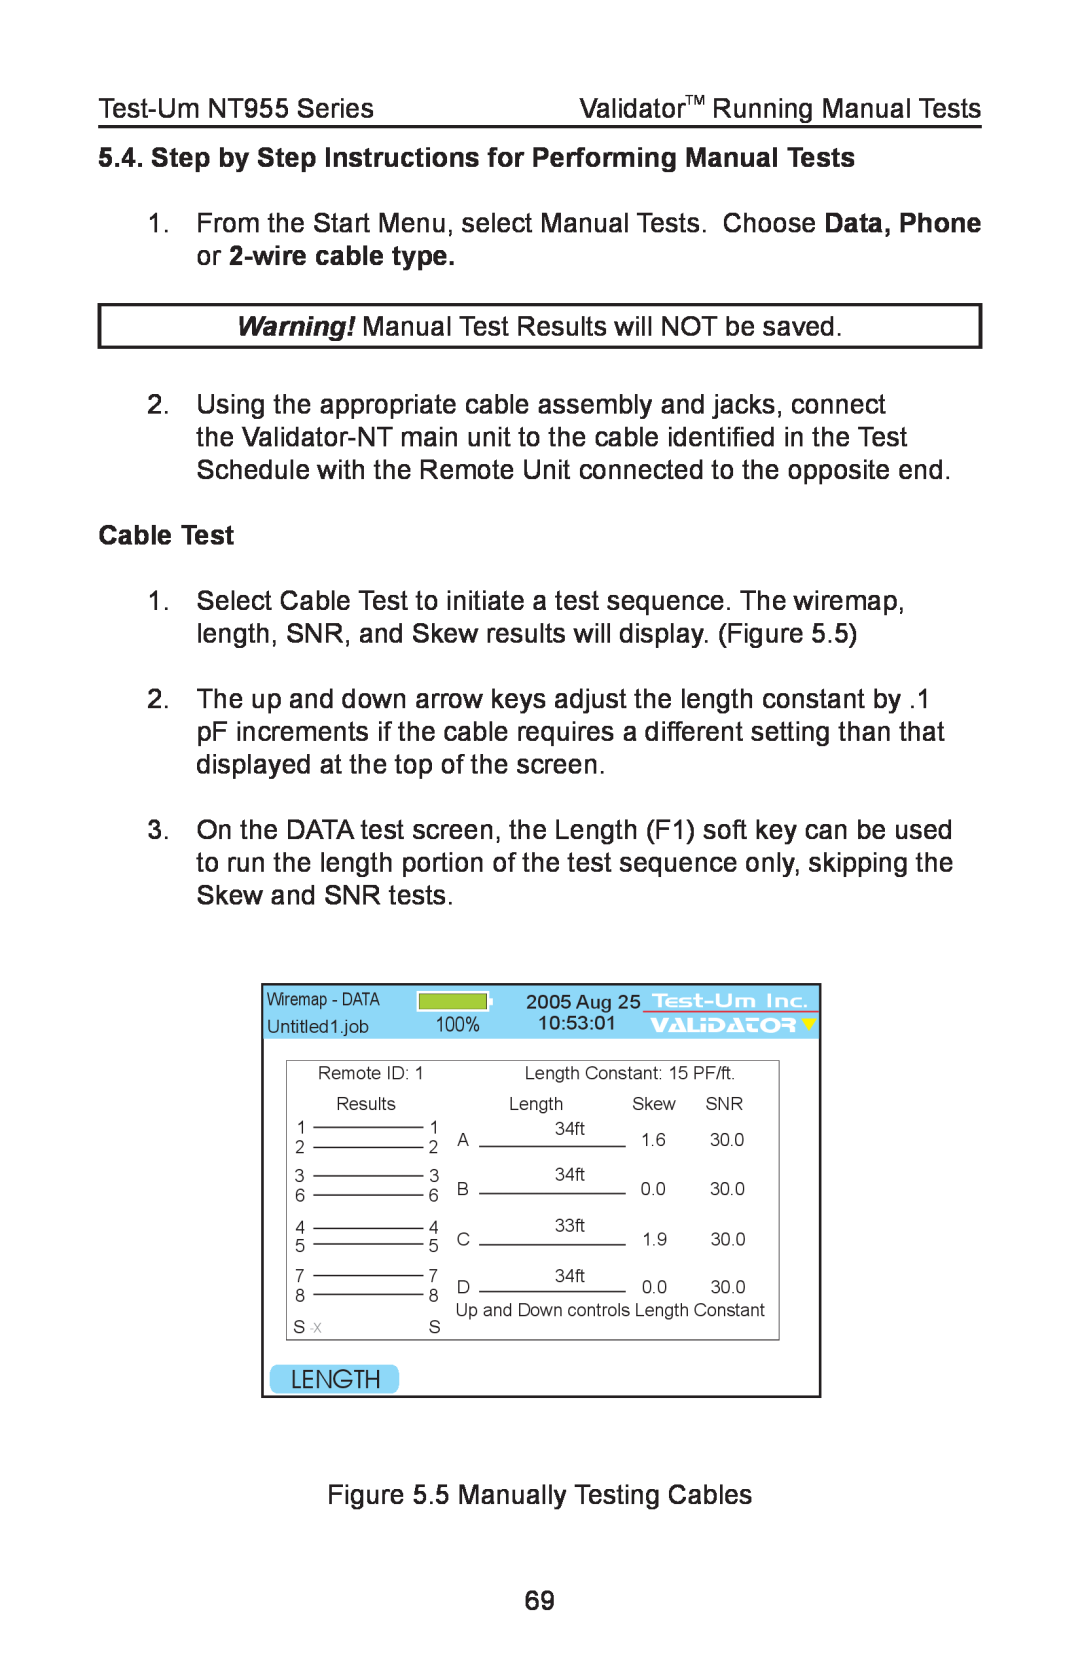 Test-Um NT955 operating instructions Step by Step Instructions for Performing Manual Tests, Cable Test, Length 